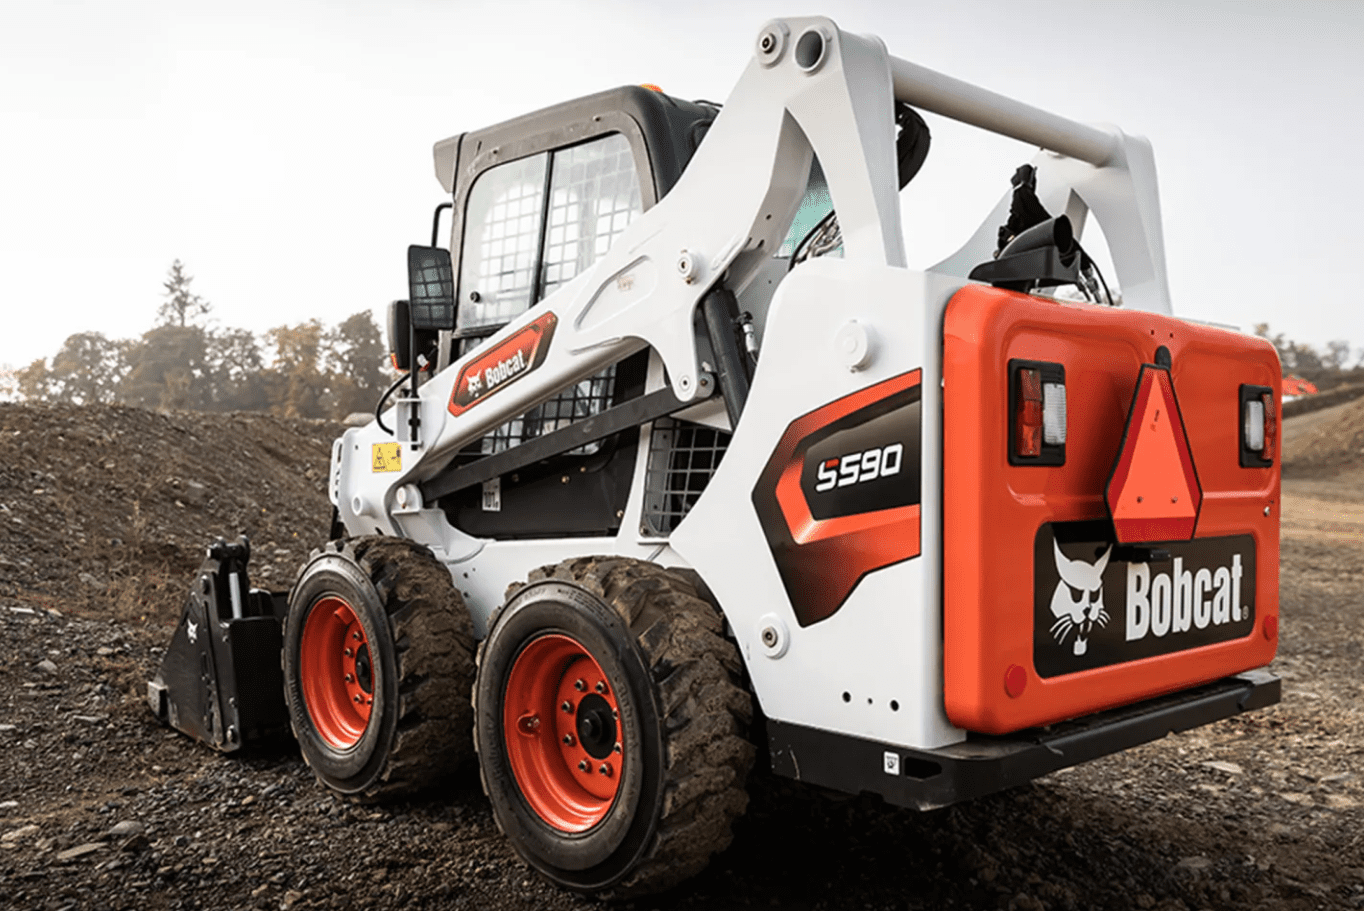 Browse Specs and more for the Bobcat S590 Skid-Steer Loader - Bobcat of North Texas